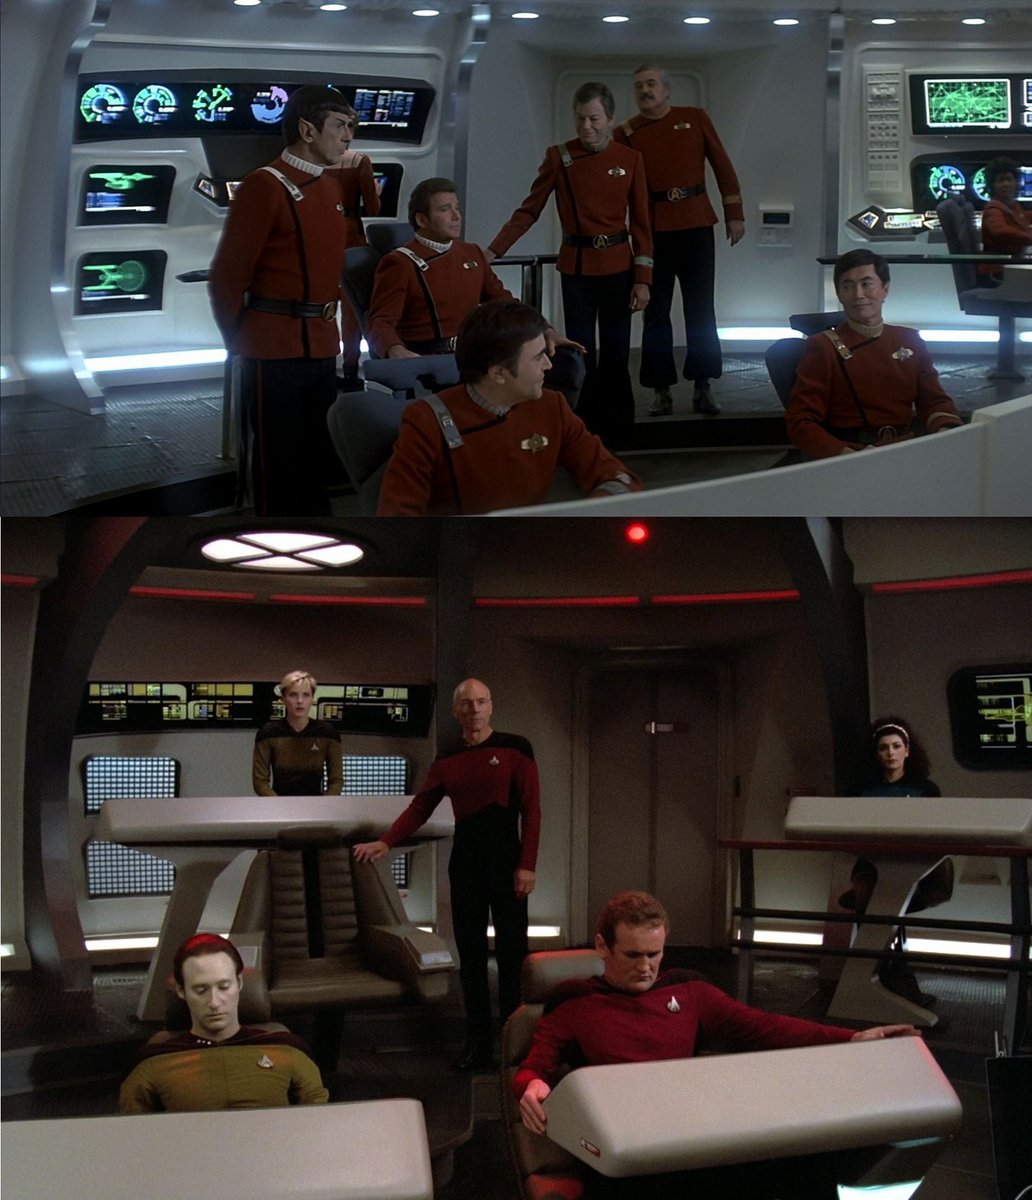 "Star Trek IV: The Voyage Home" and "Encounter at Farpoint".